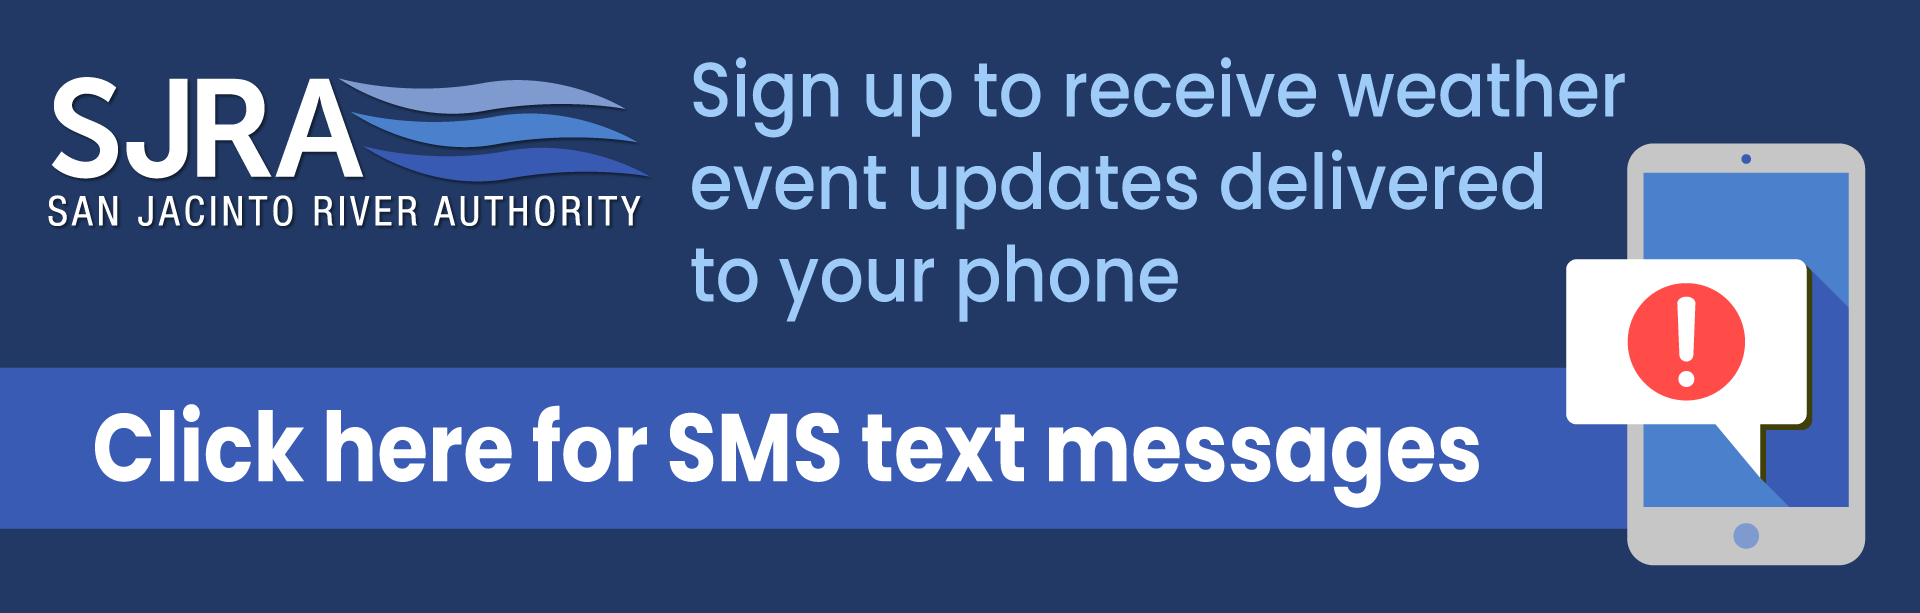 Sign up for TEXT